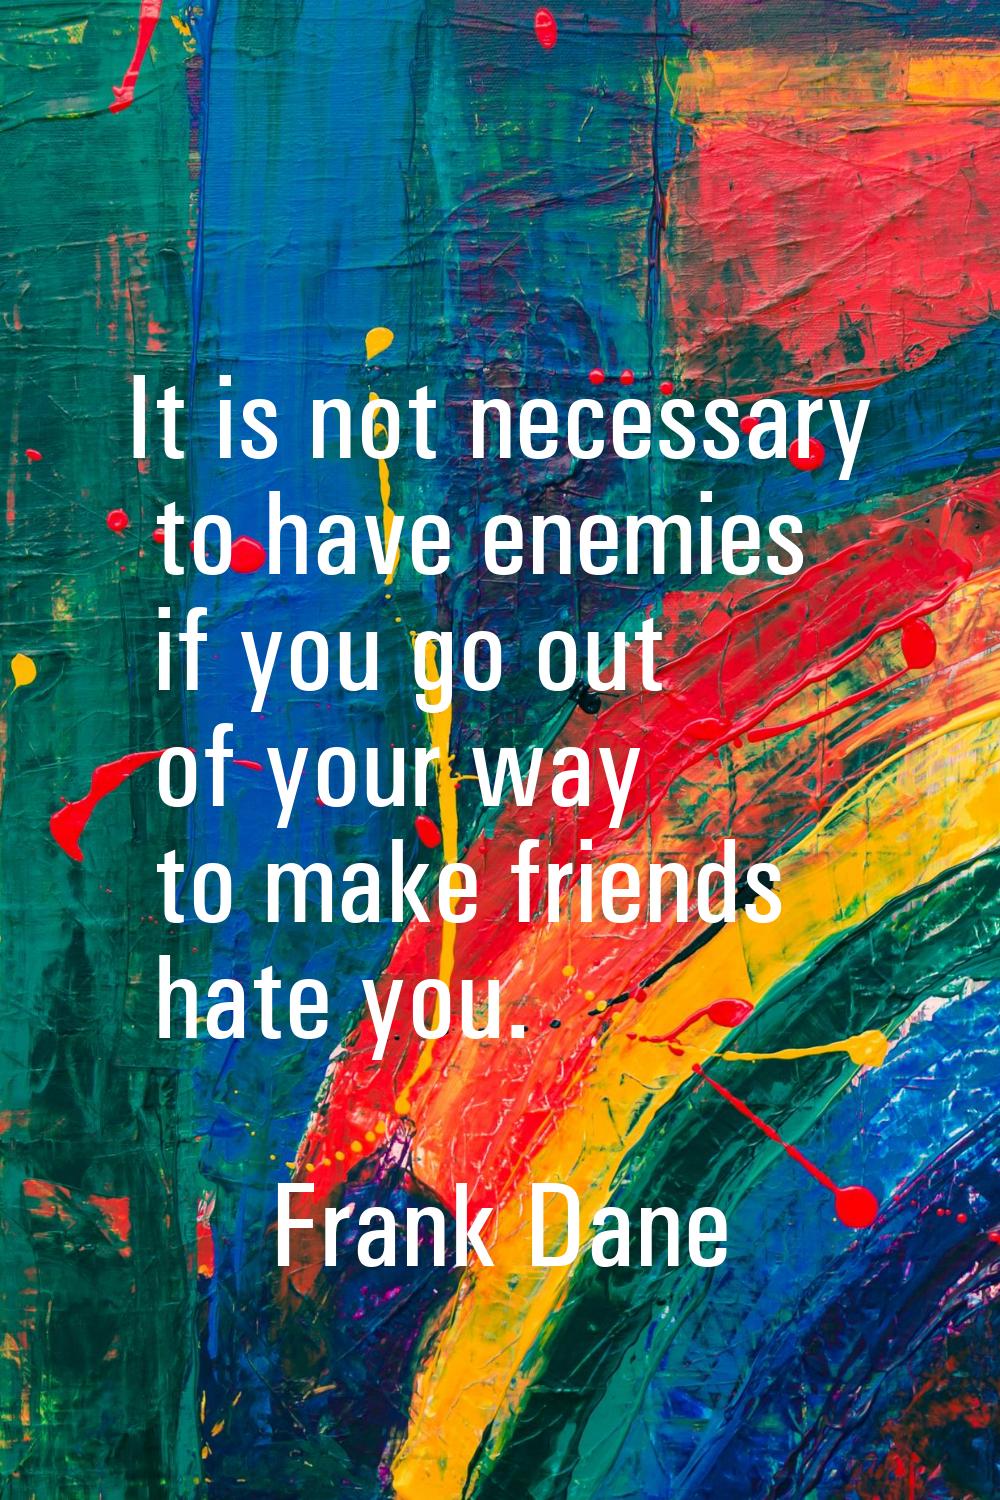 It is not necessary to have enemies if you go out of your way to make friends hate you.